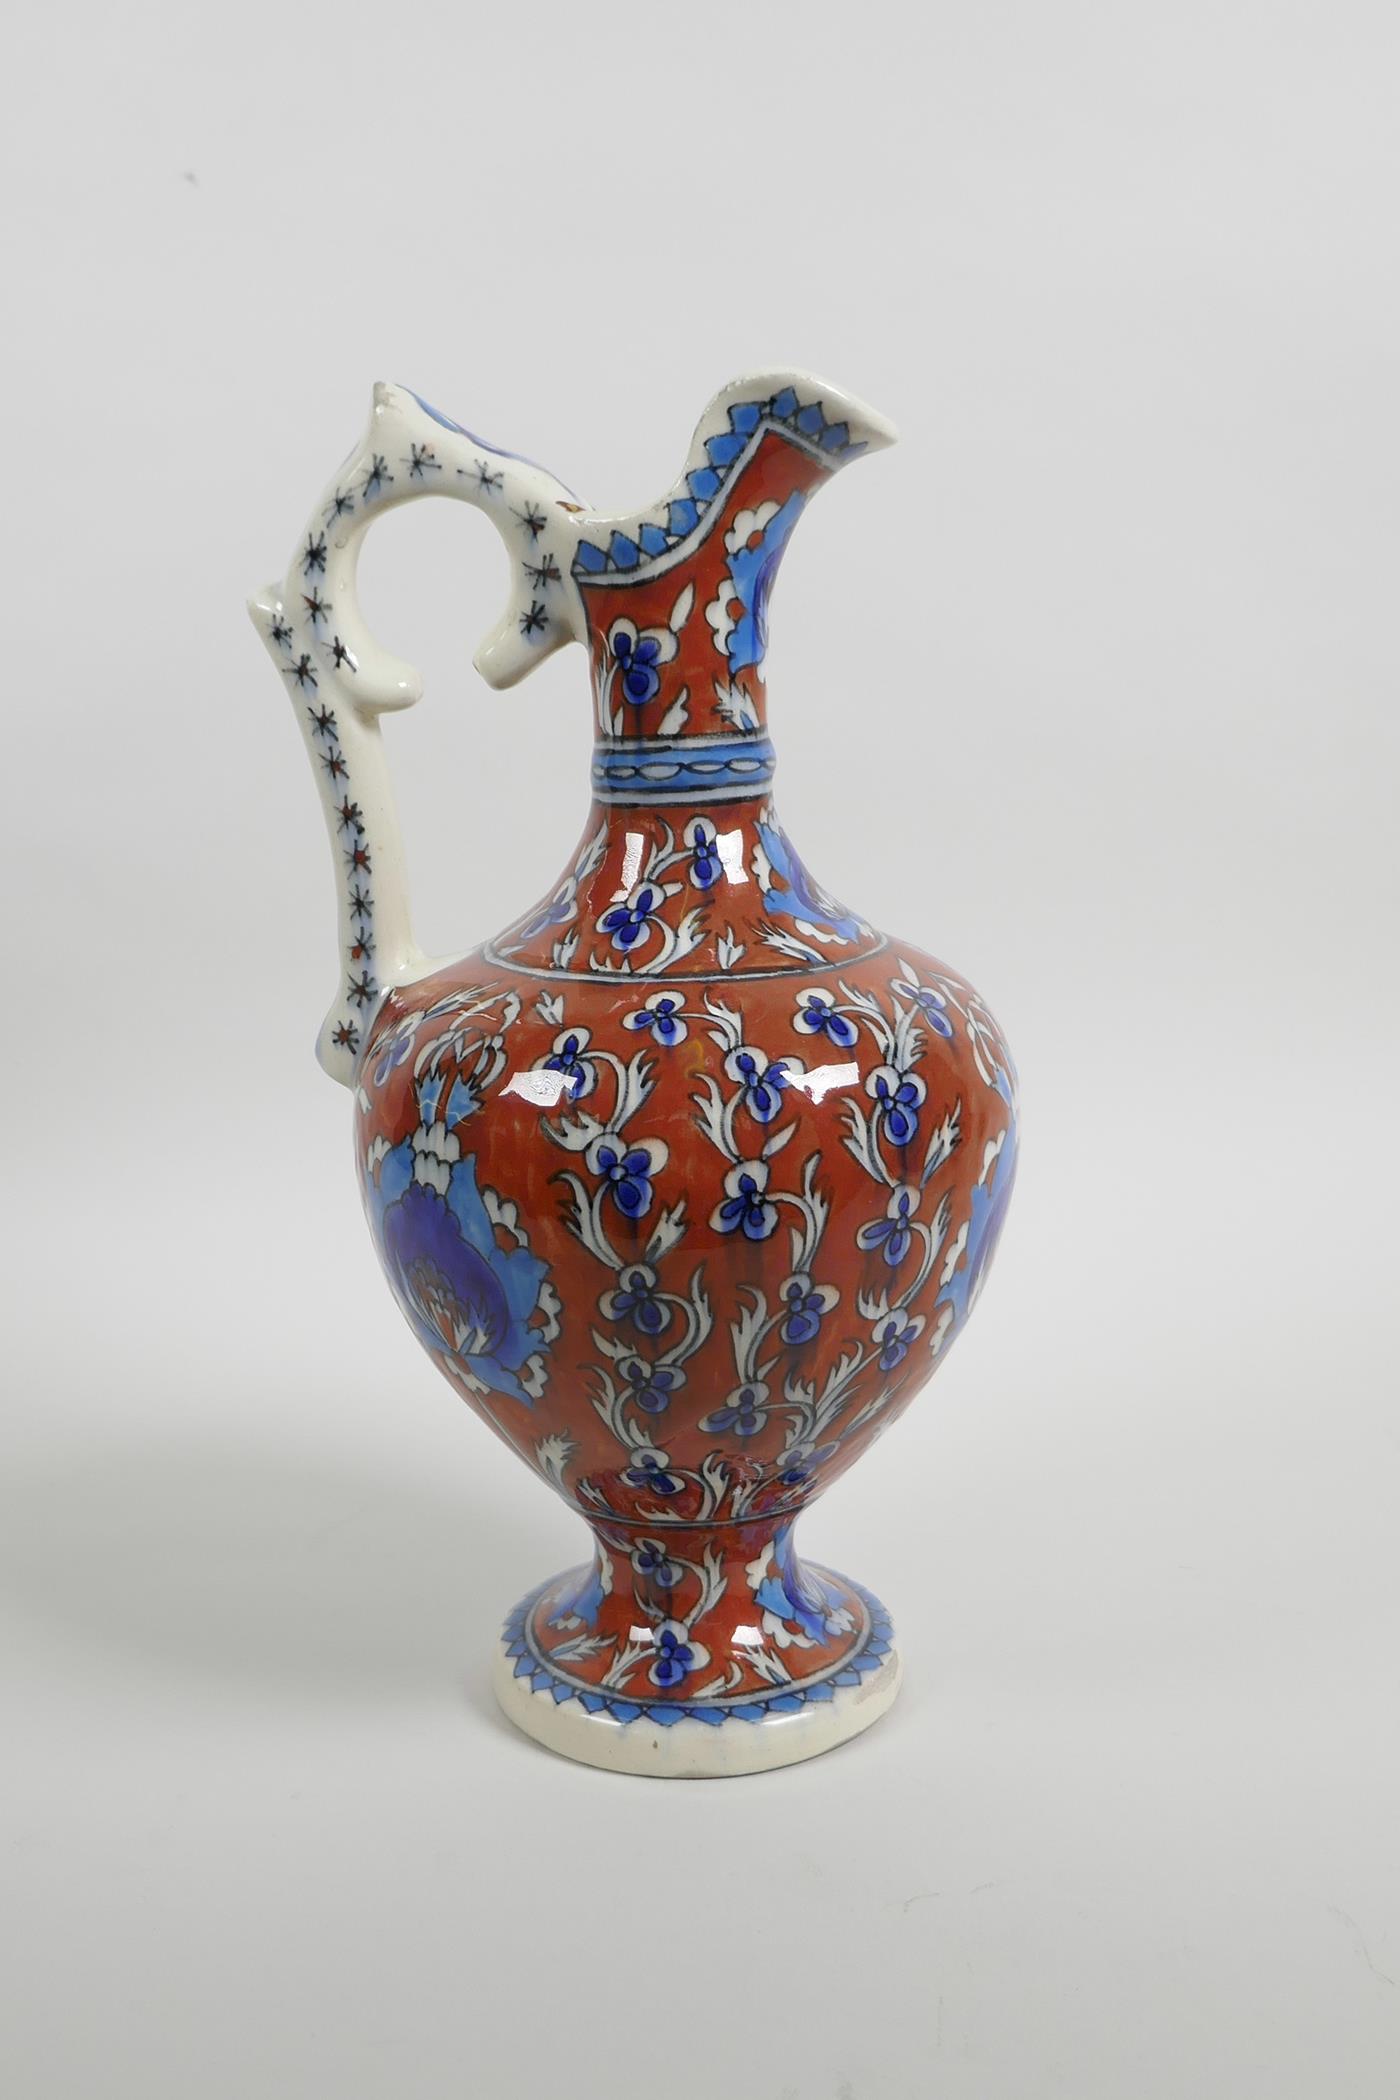 An early C20th Turkish Kutahya pottery ewer with traditional floral decoration, repair to handle, 10